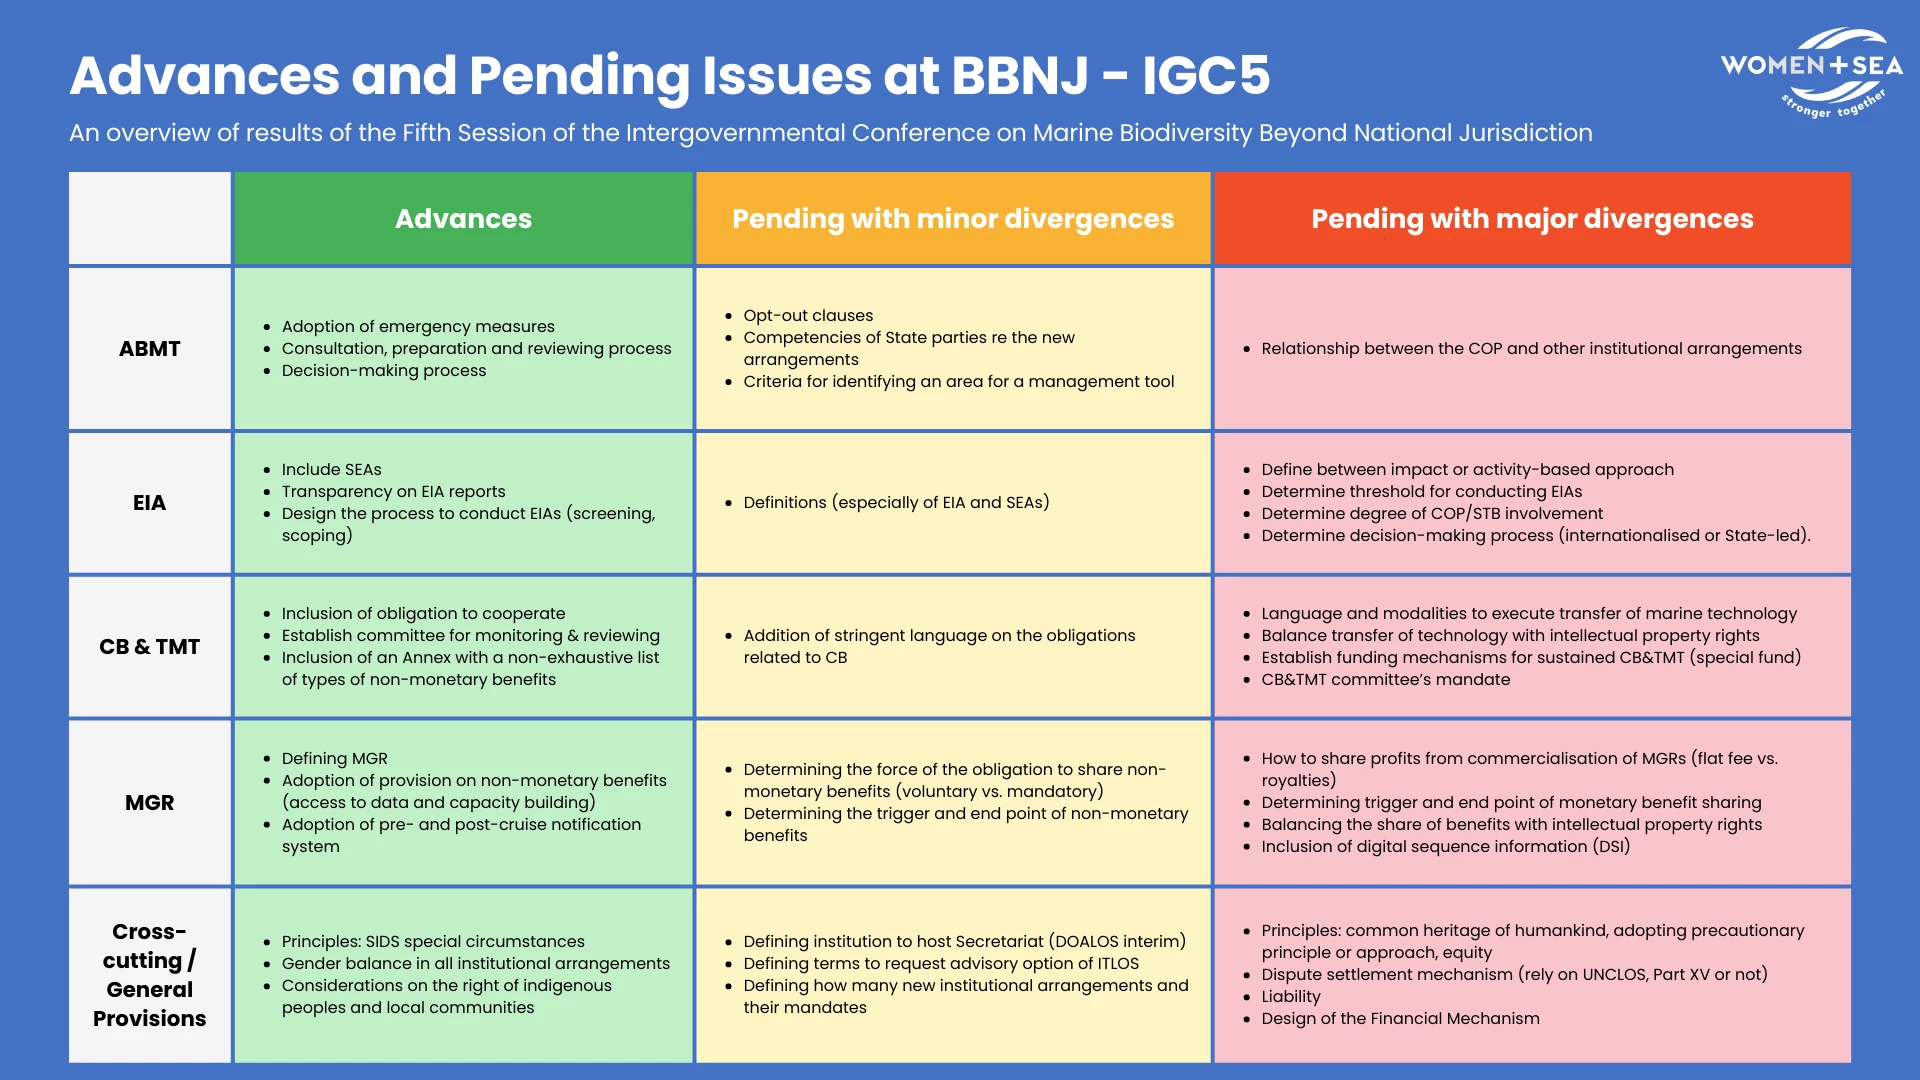 Overview Advances and Pending Issues at BBNJ IGC-5 final